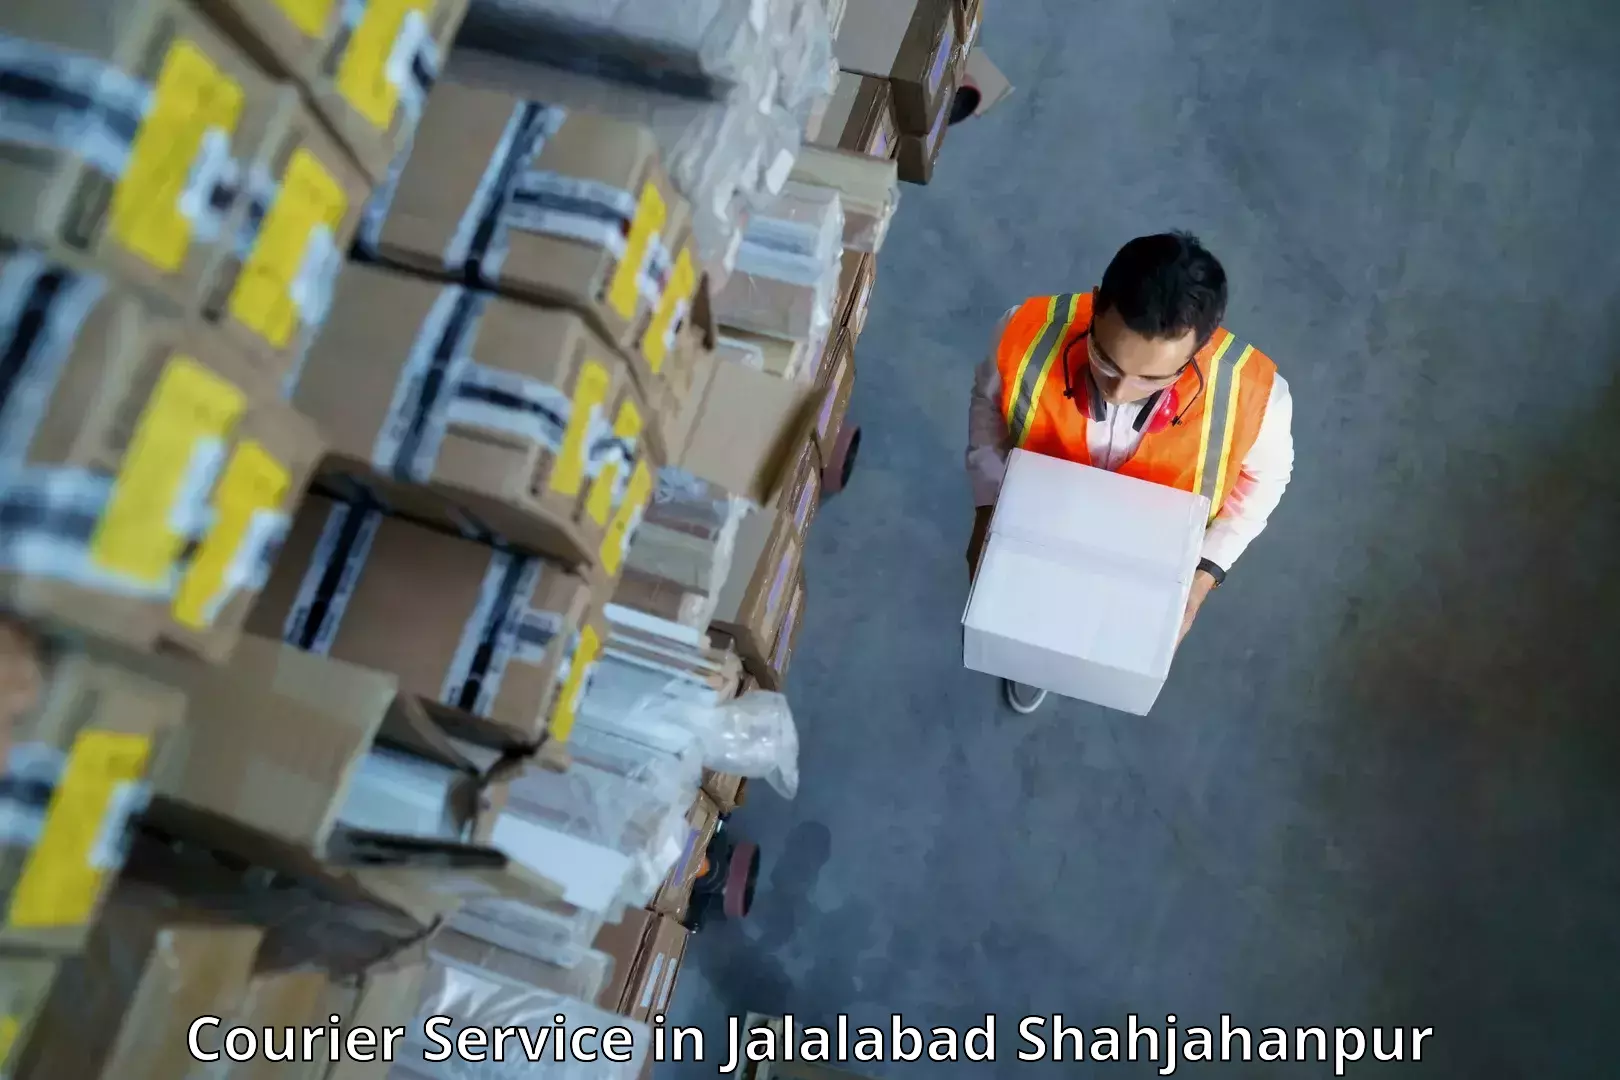 Business logistics support in Jalalabad Shahjahanpur